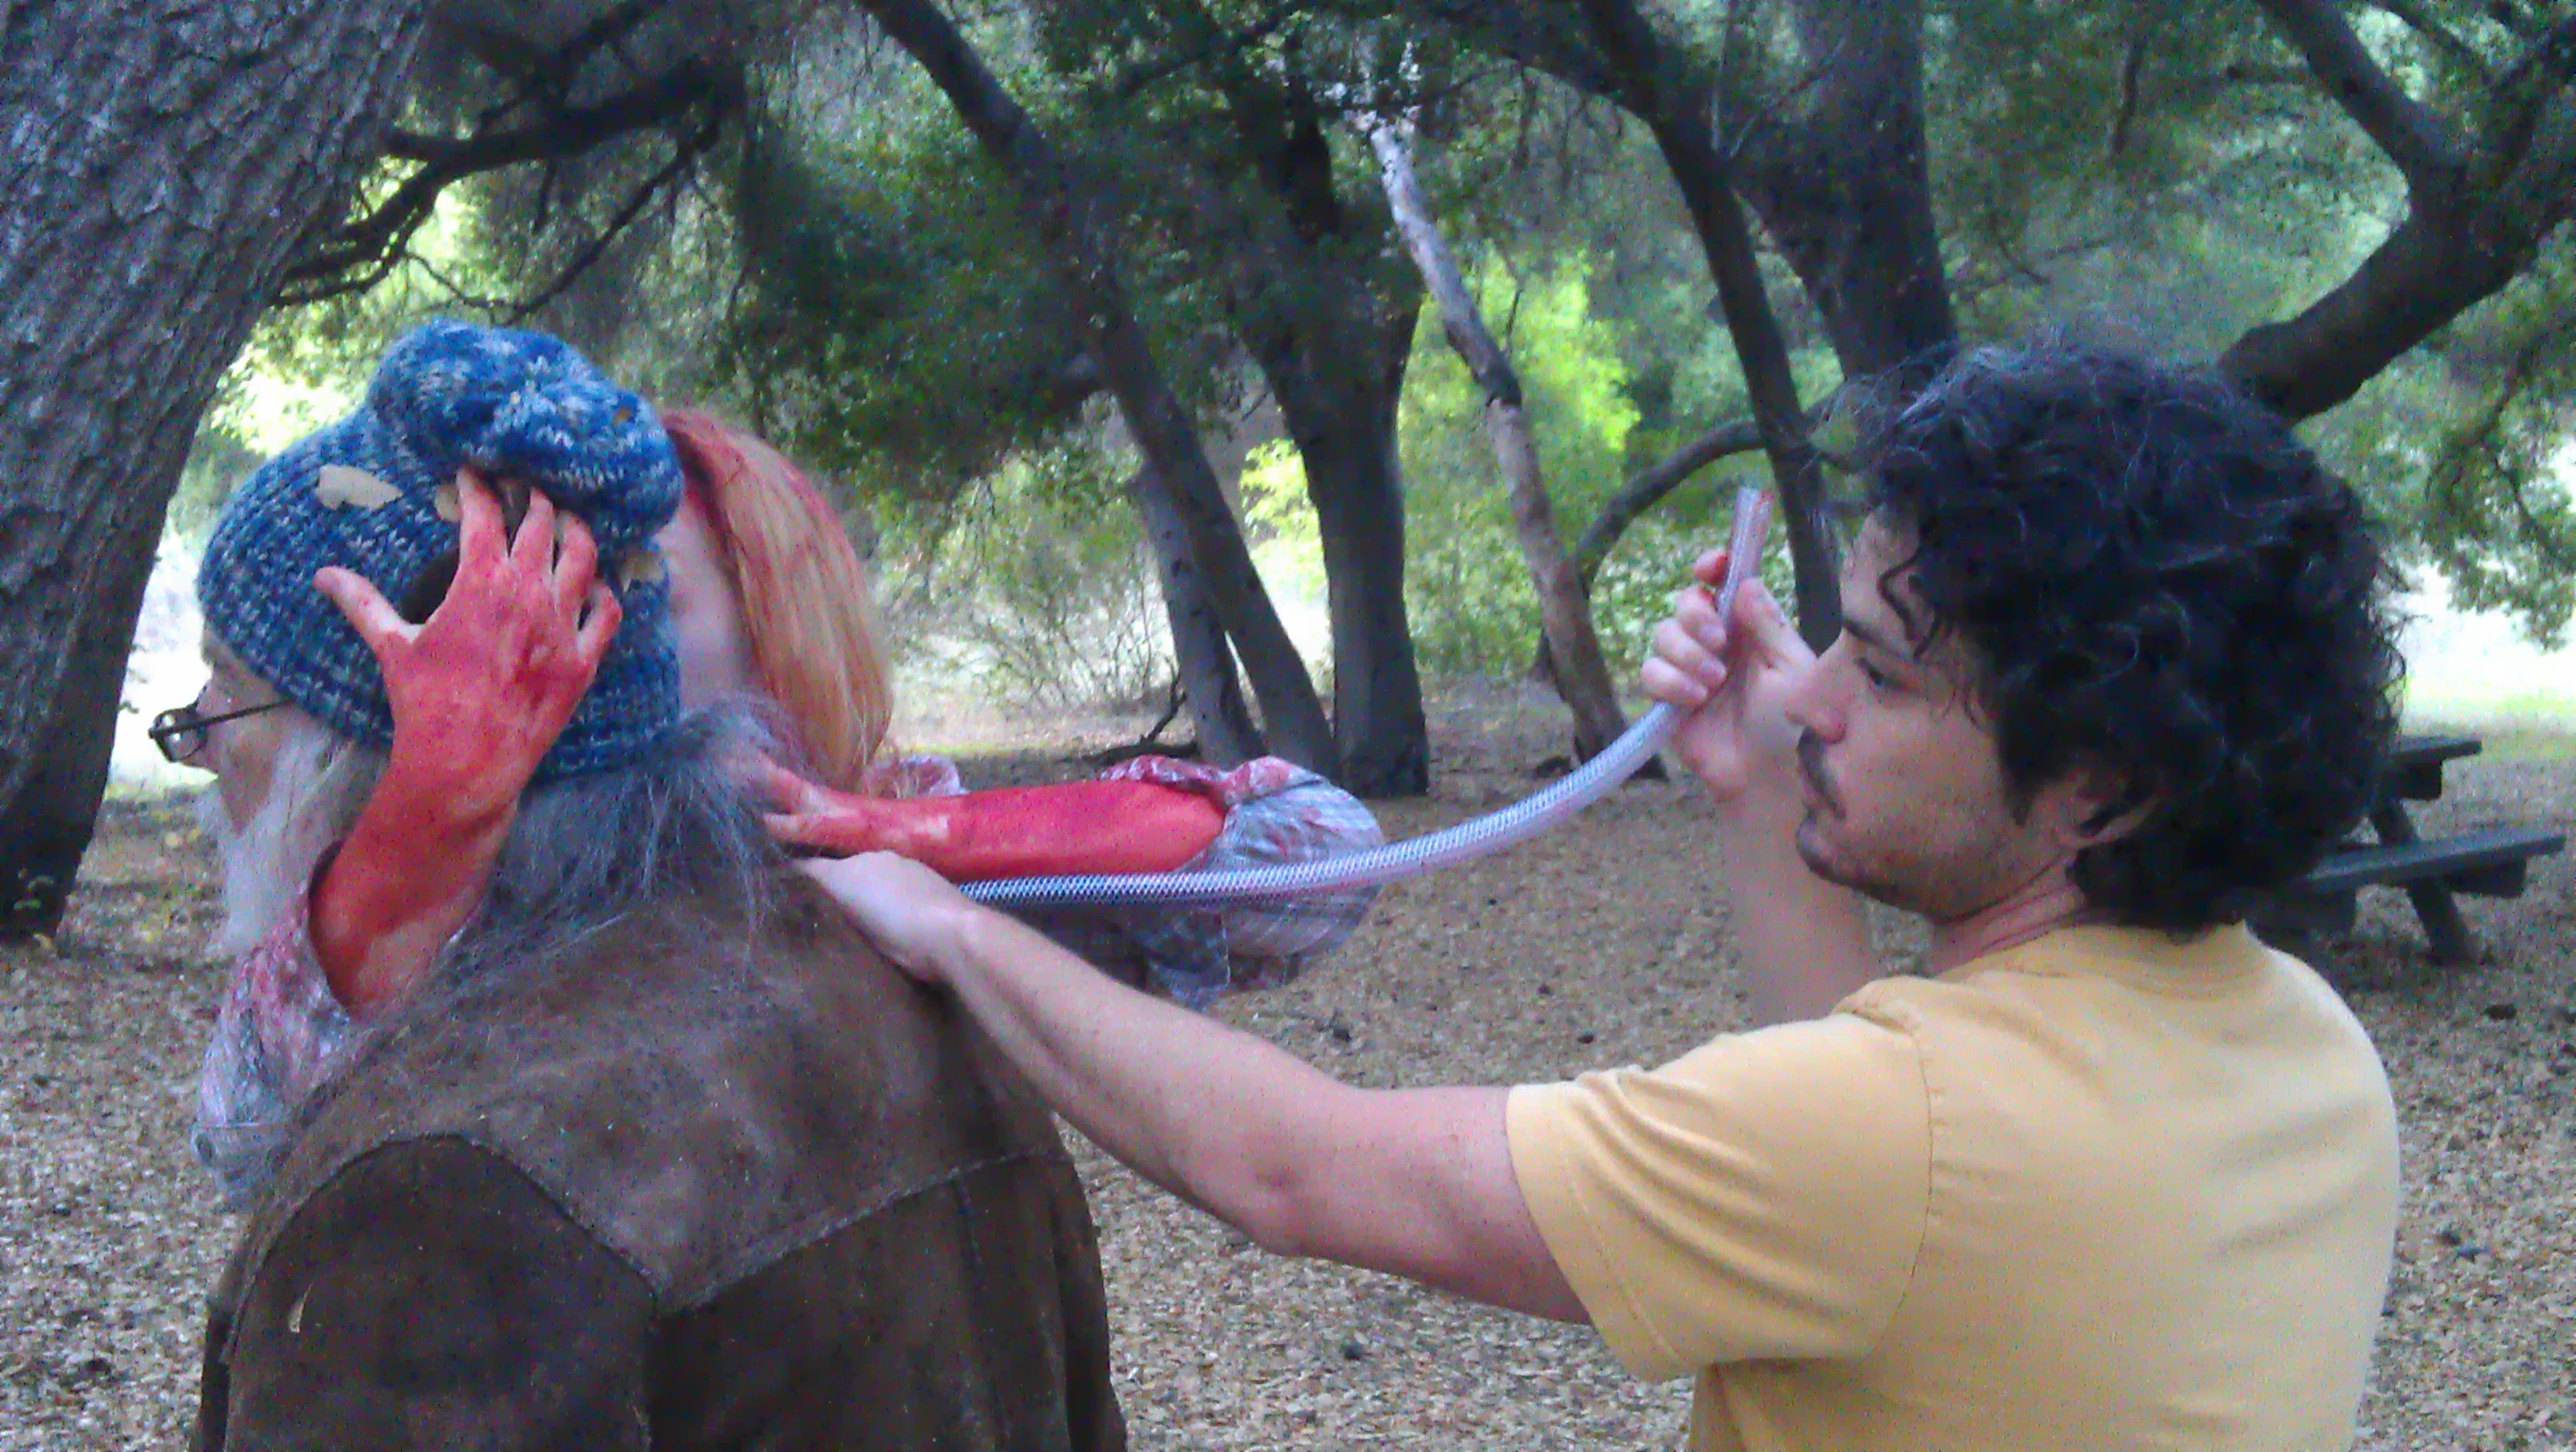 Evan blows blood out a tube for the homeless guy zombie attack shot for 'Blood Rush.'